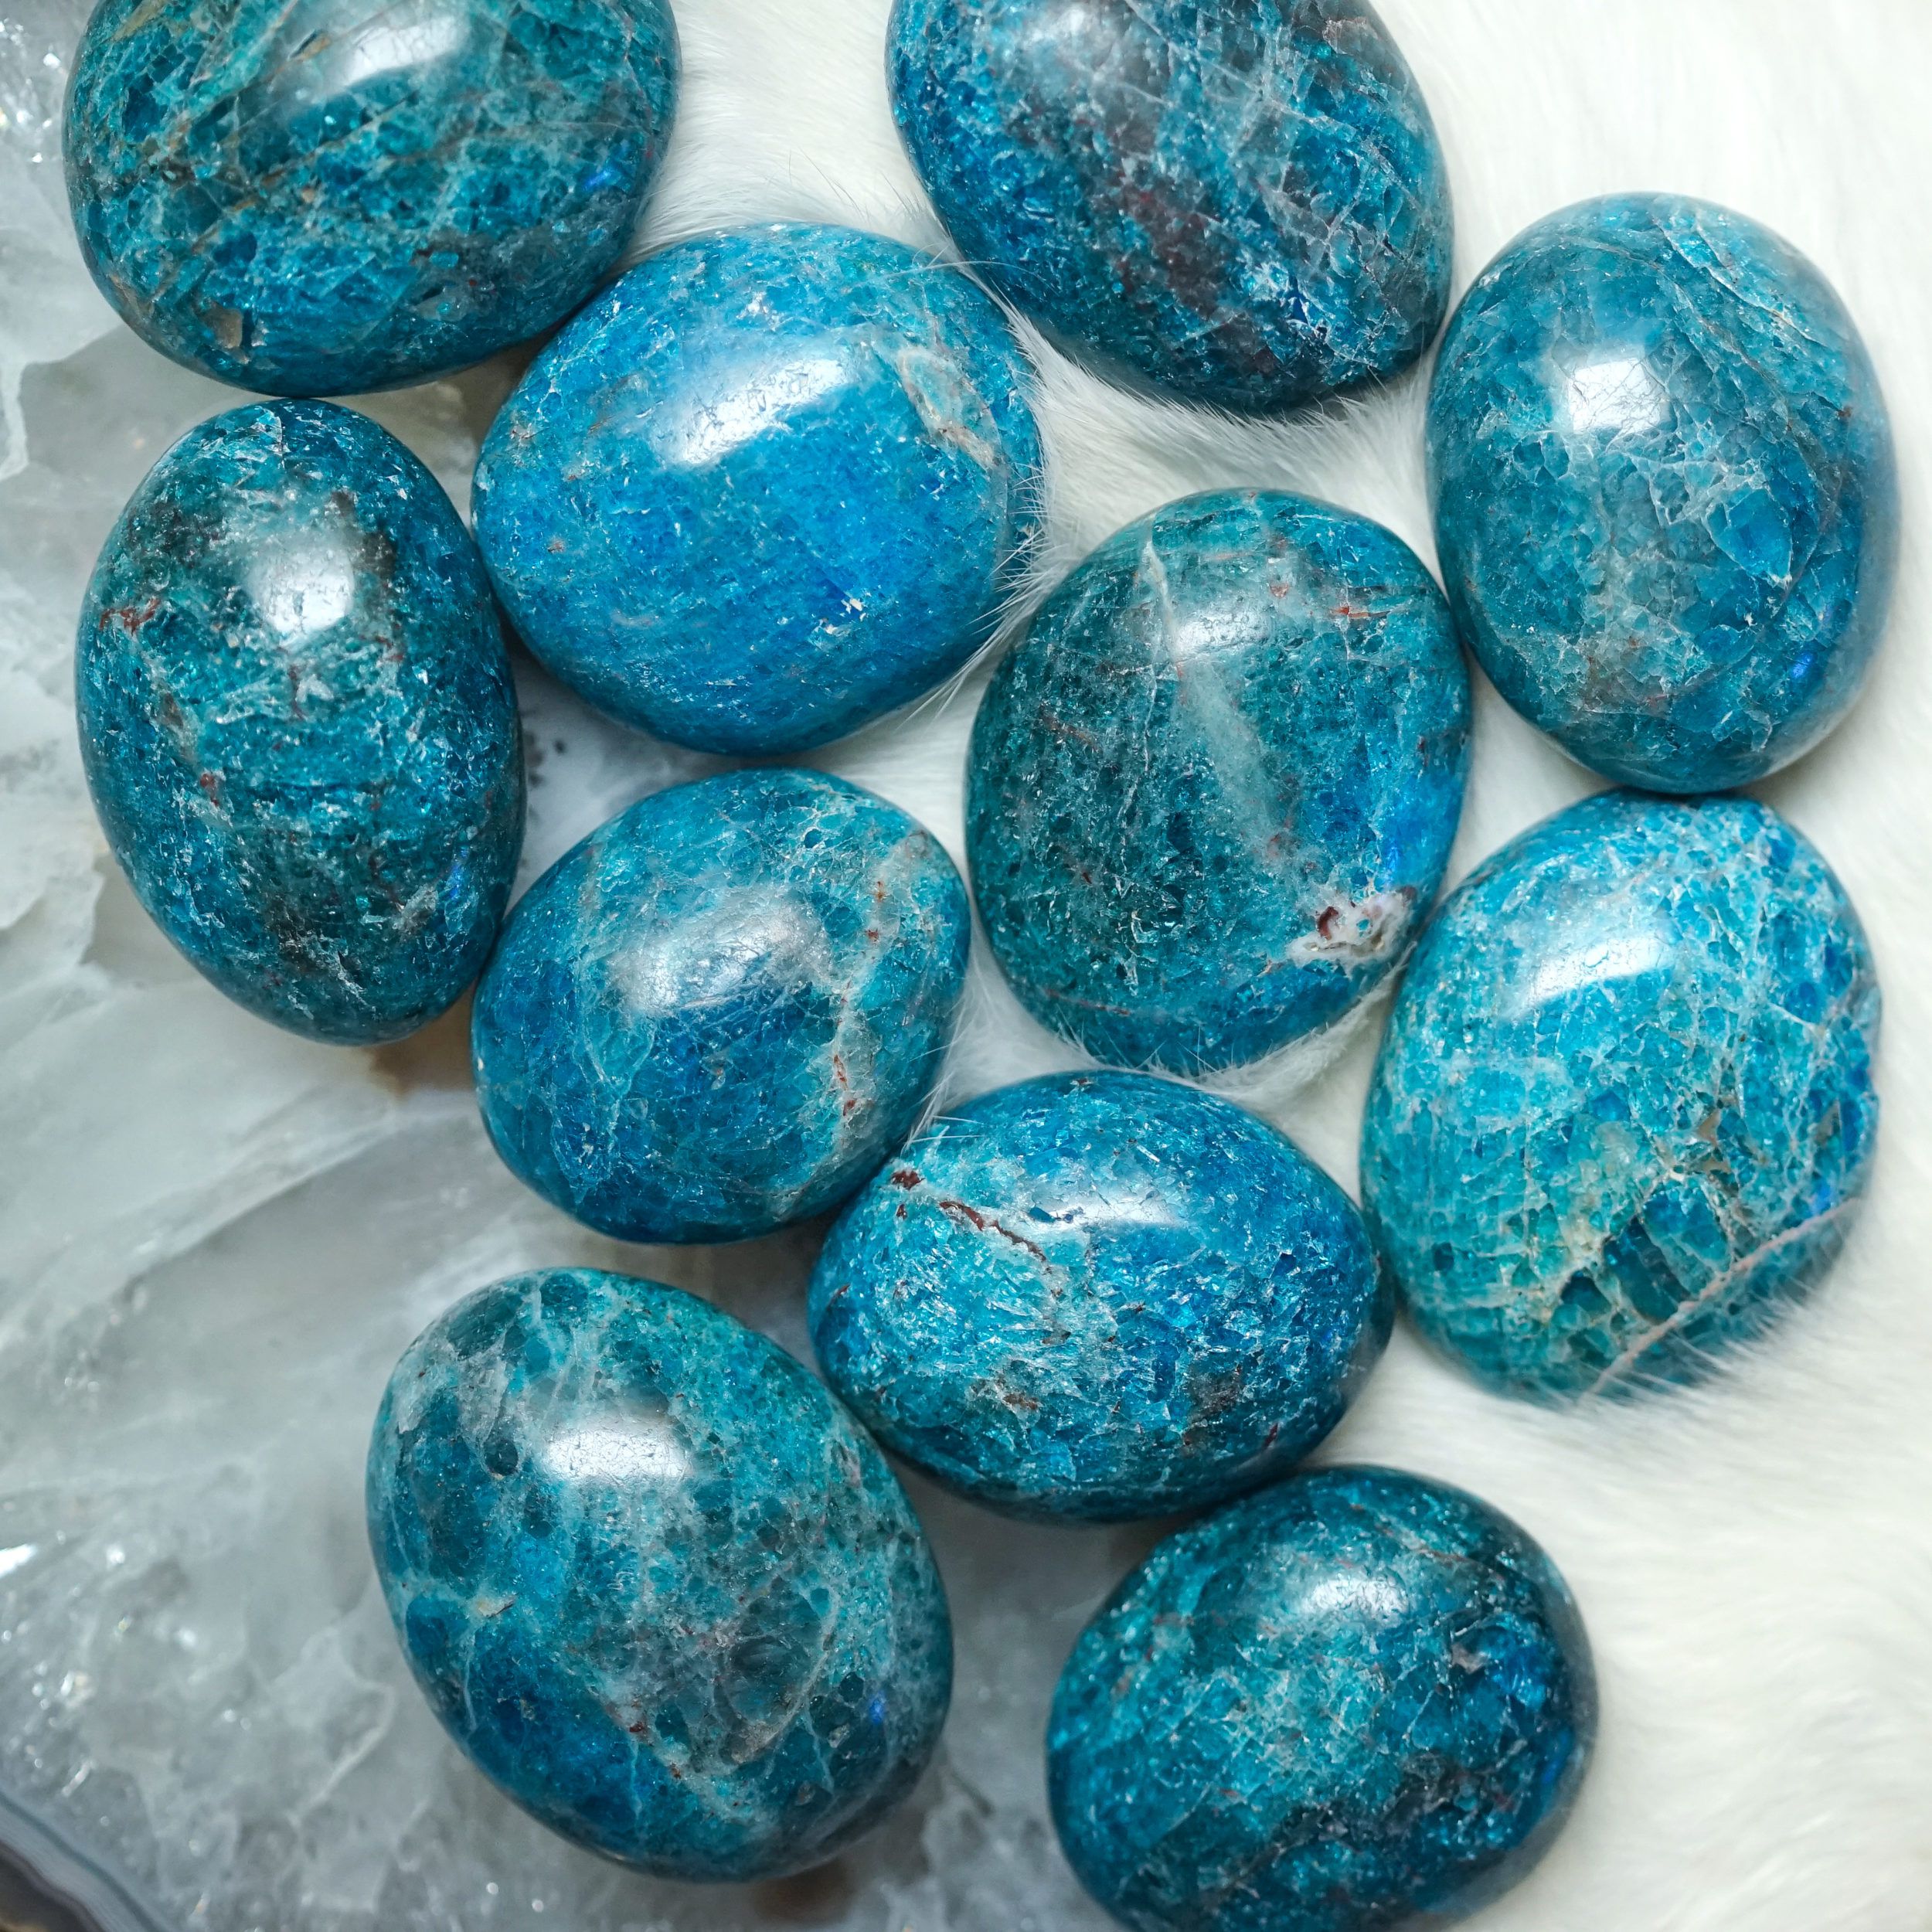 Blue Apatite Meanings, Properties and Uses